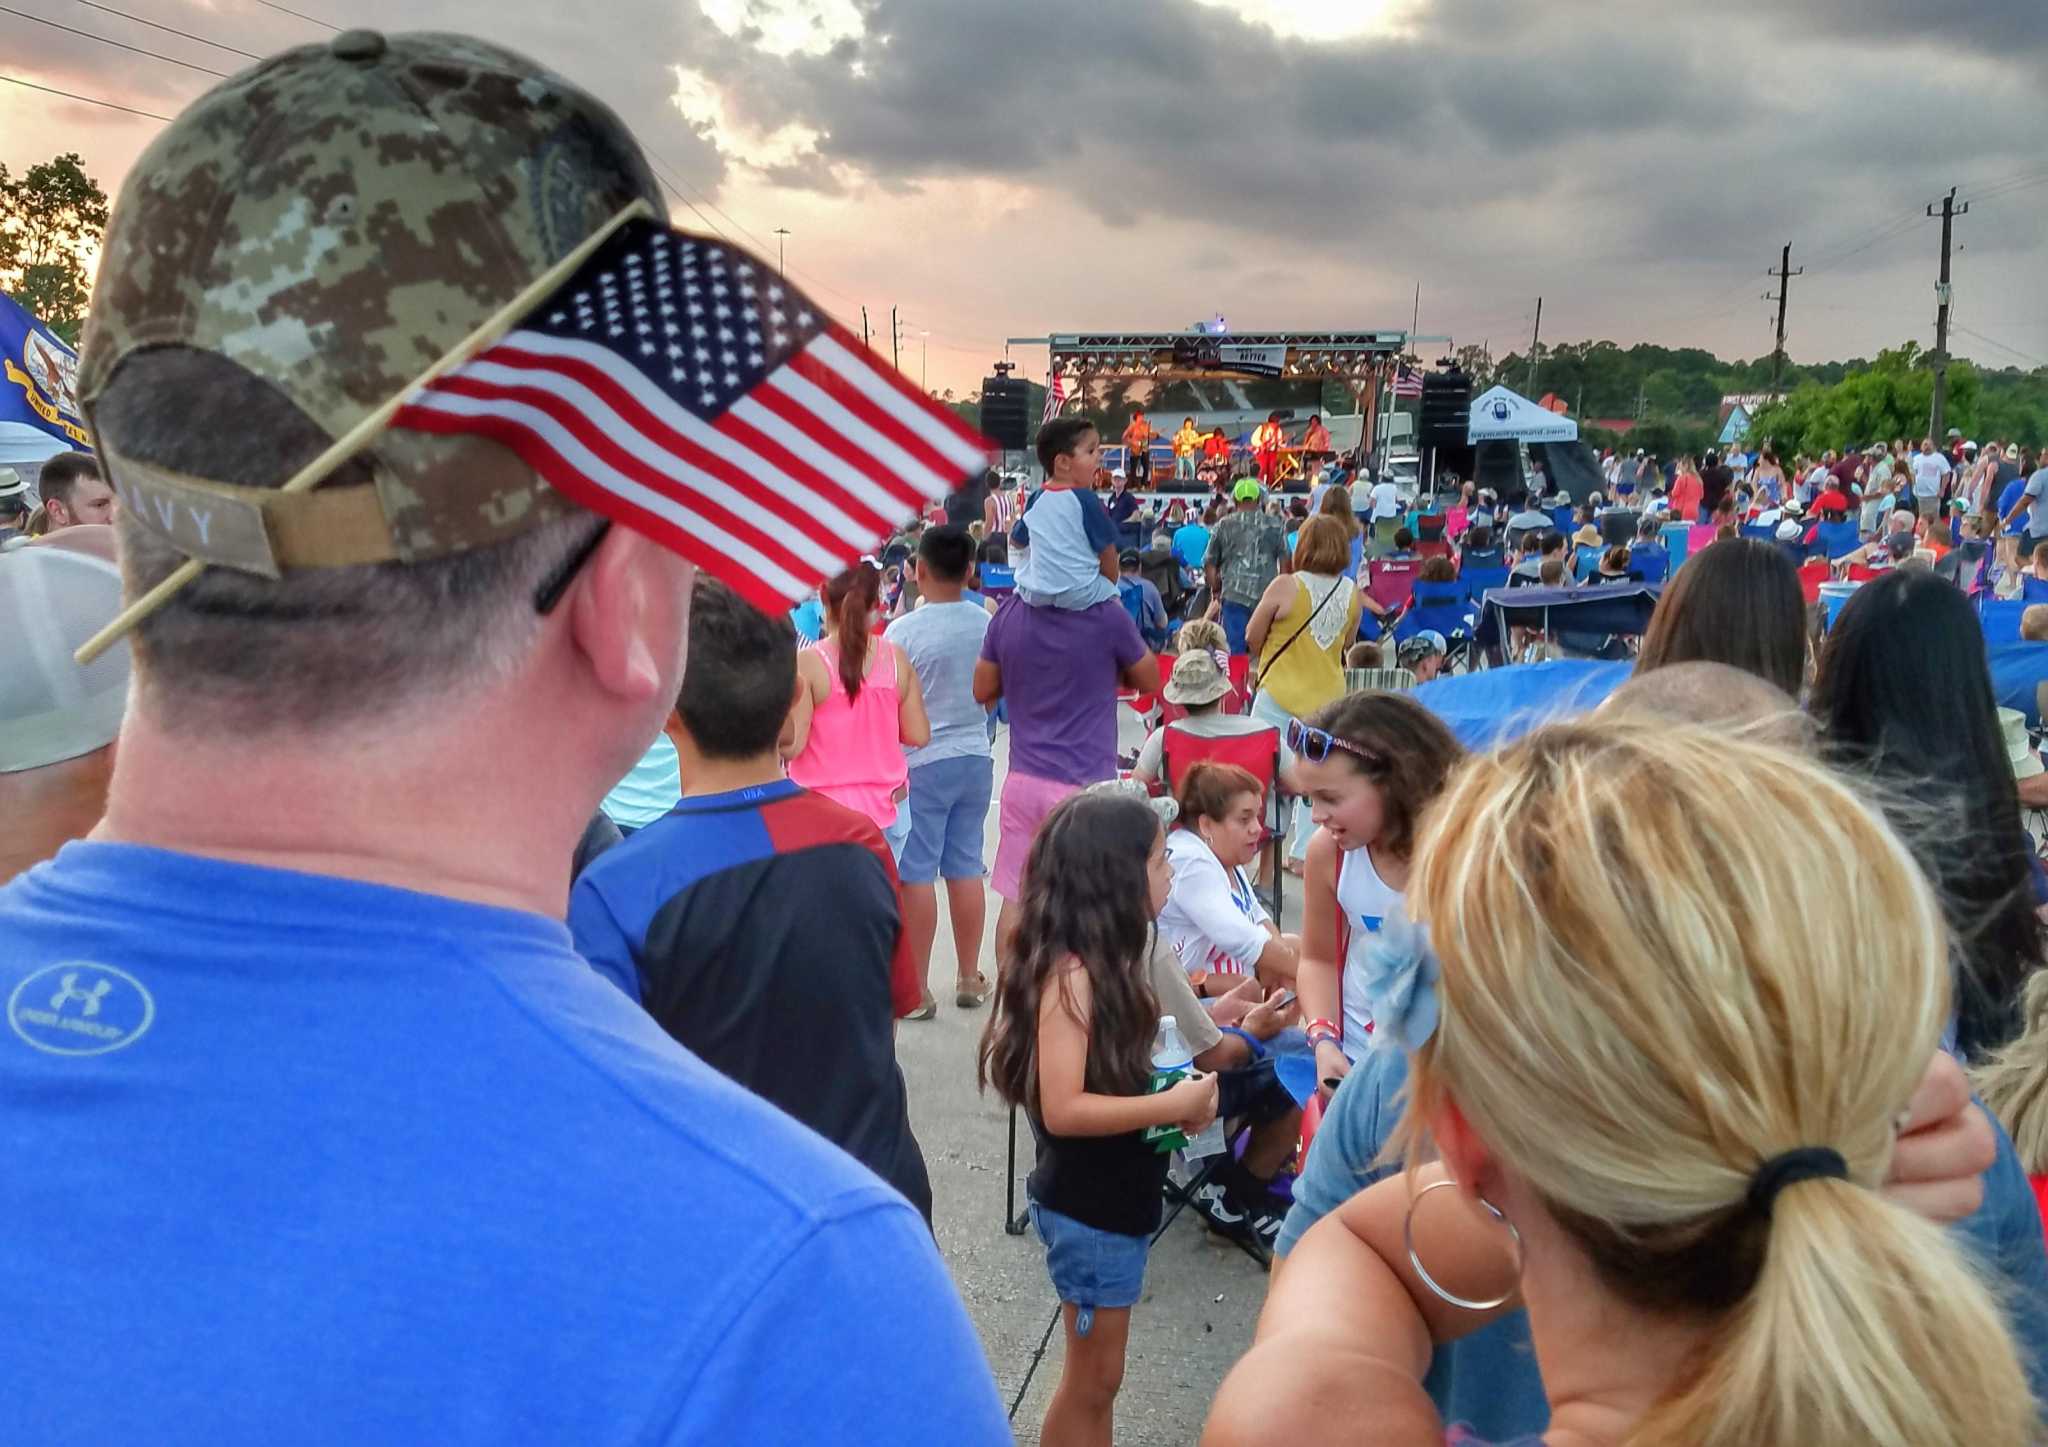 Tomball expects thousands to attend 4th of July event